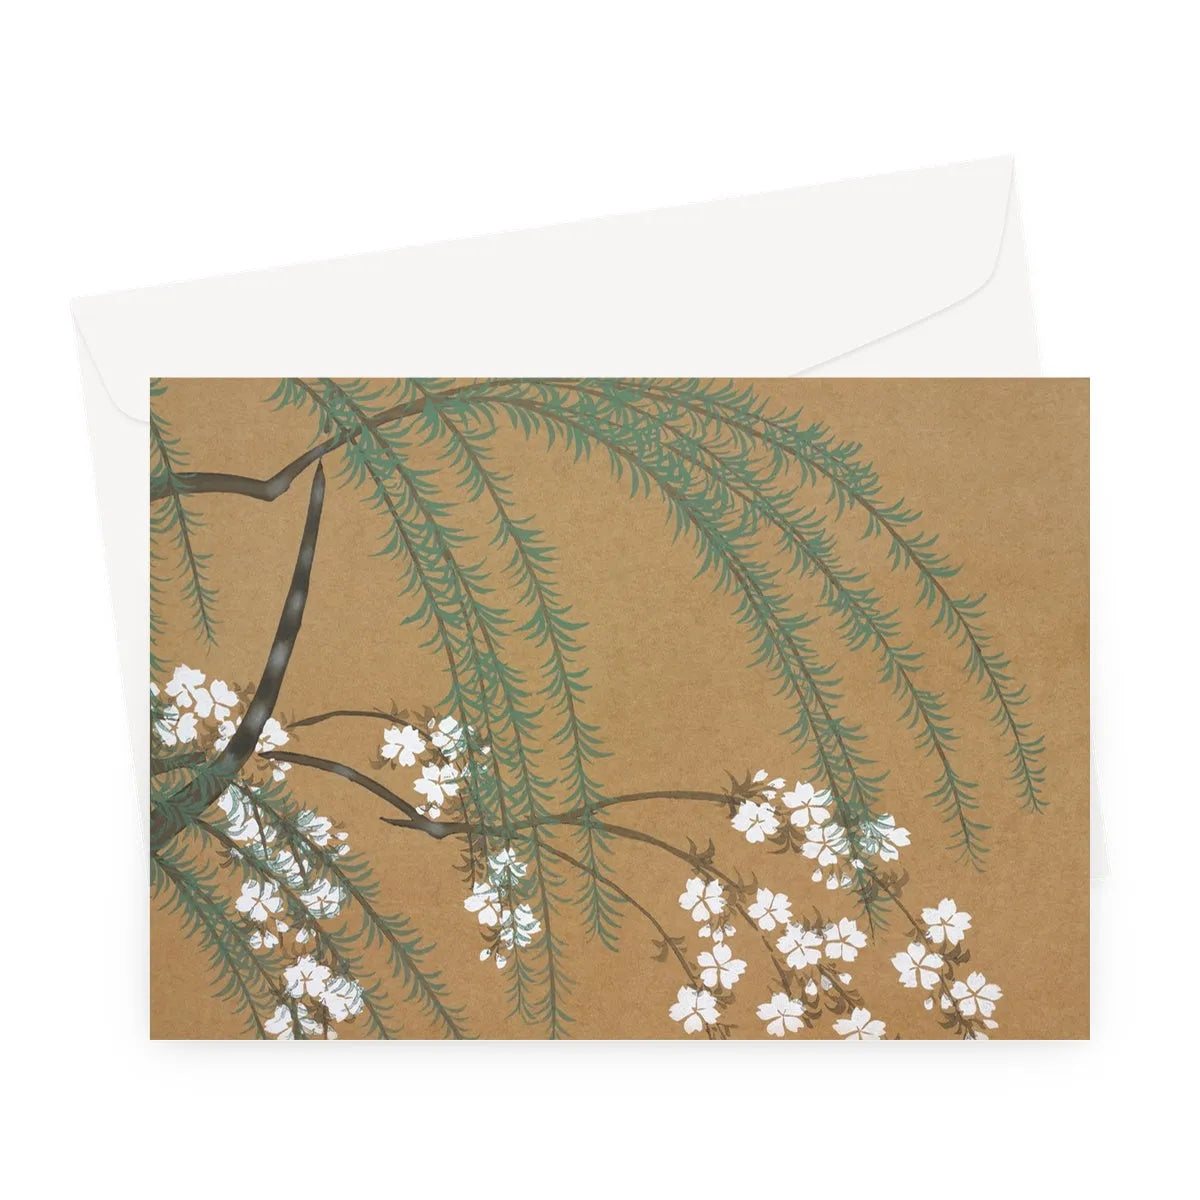 Blossoms From Momoyogusa By Kamisaka Sekka Greeting Card - A5 Landscape / 1 Card - Greeting & Note Cards - Aesthetic Art